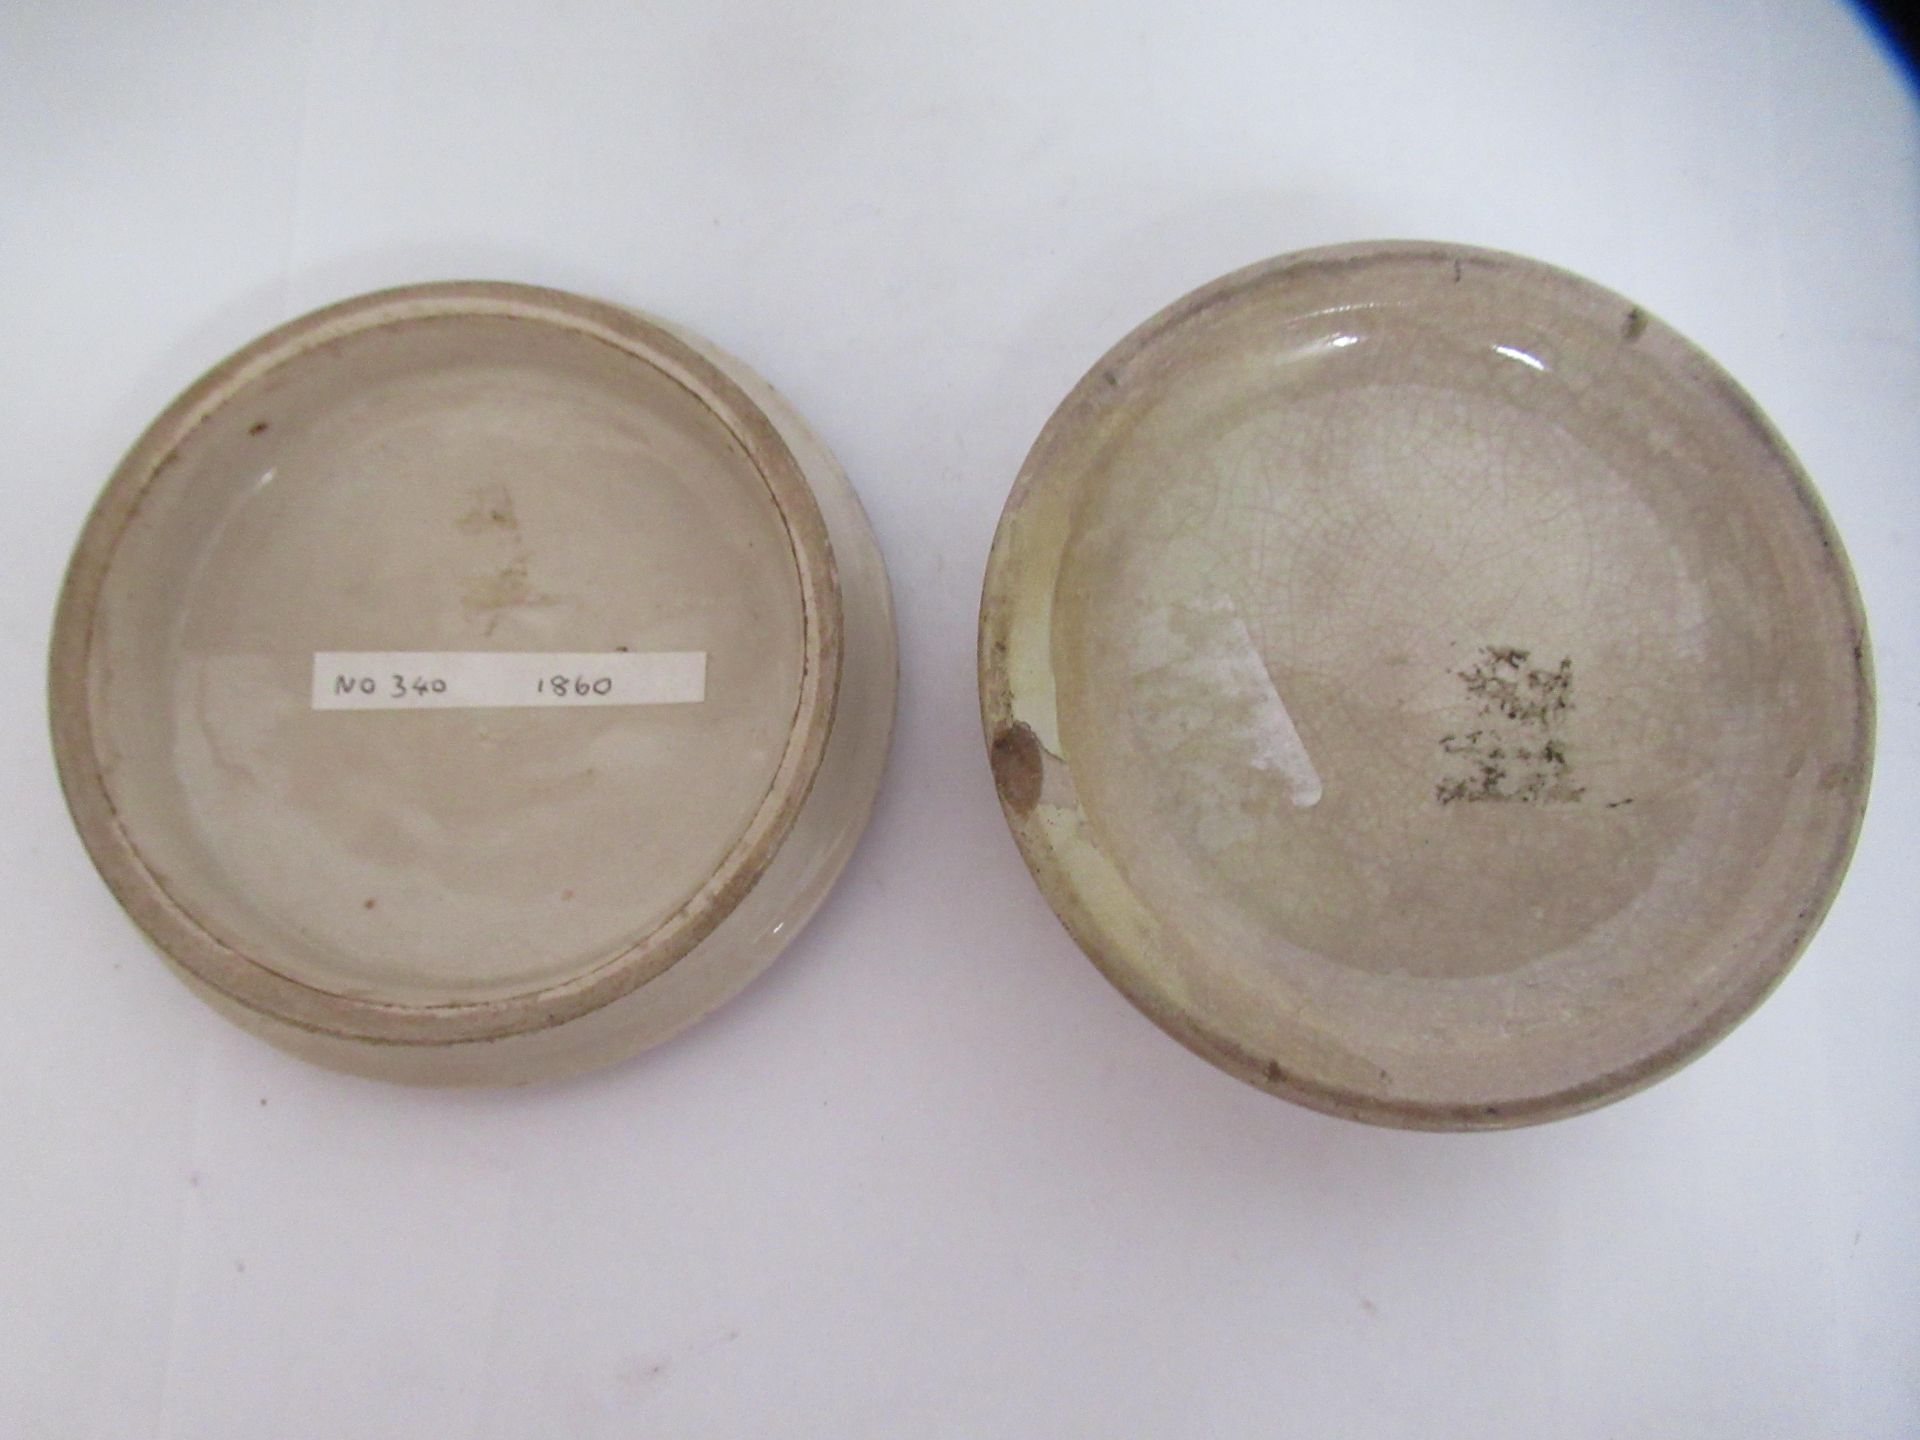 6x Prattware ceramic lids including 'On Guard', 'The Rivals', 'The Cavalier', and 'Peace' - Image 15 of 37